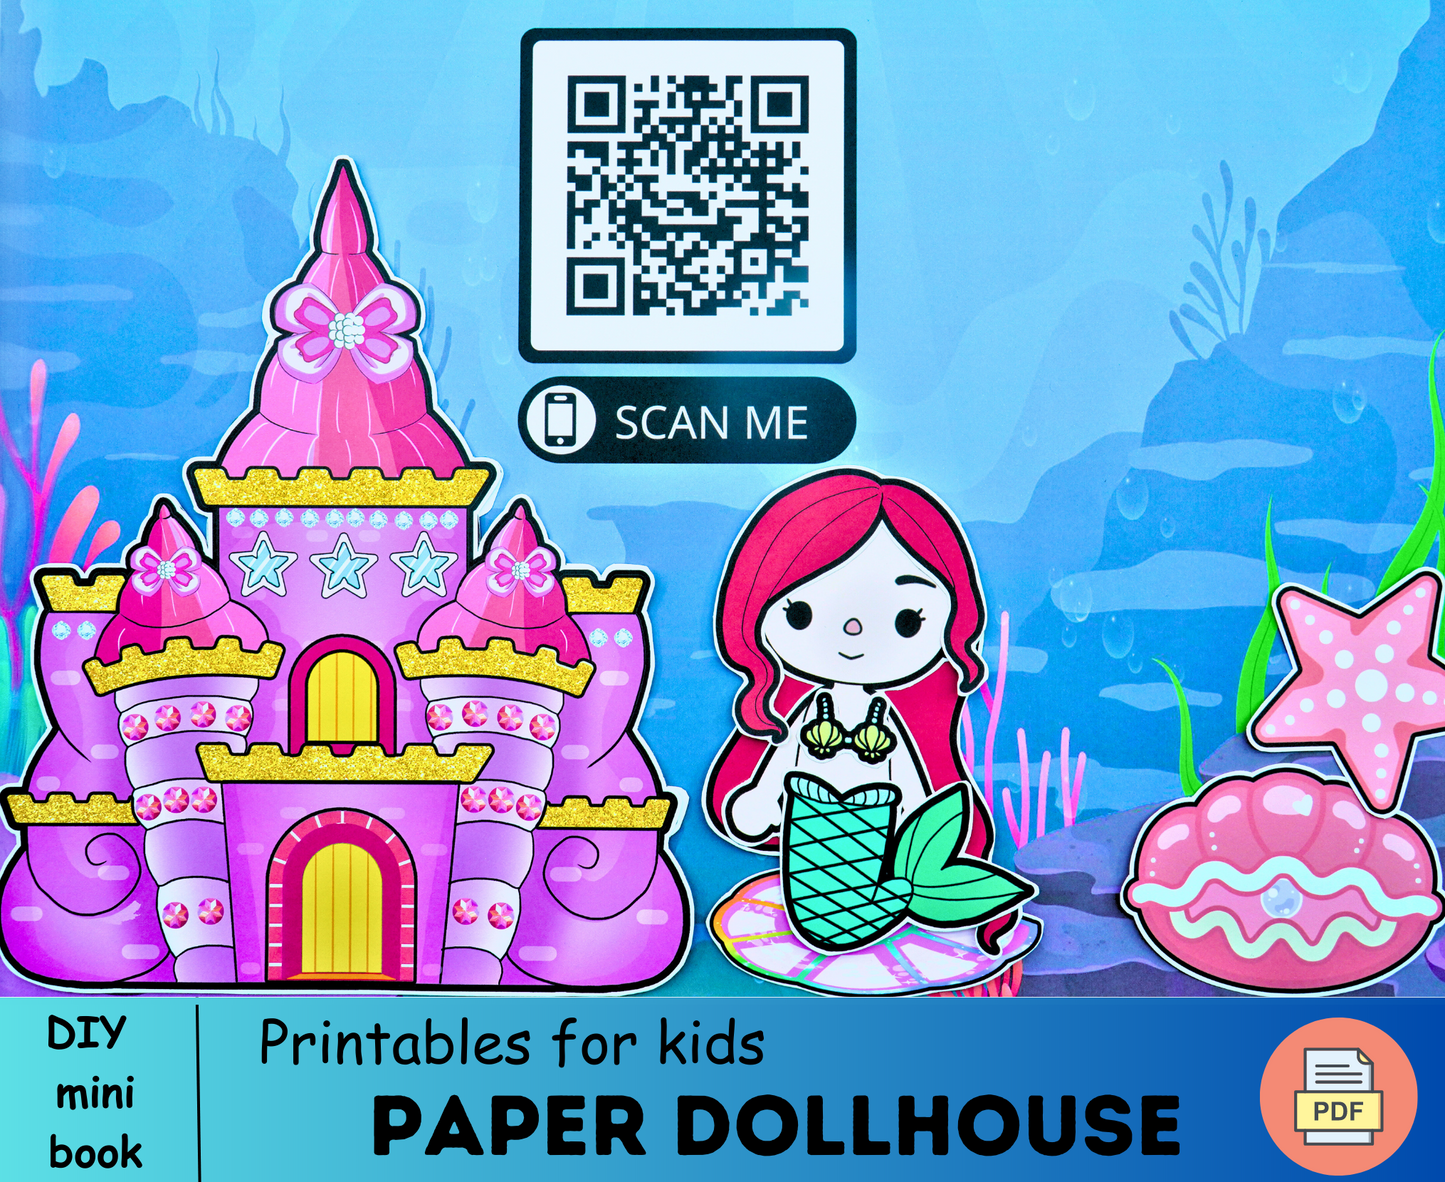 Printable Toca Boca Mermaid Paper Doll 🌈 Dress Up Toca Boca Mermaid Doll | Activity Quiet book pages for kids 🌈 Woa Doll Crafts